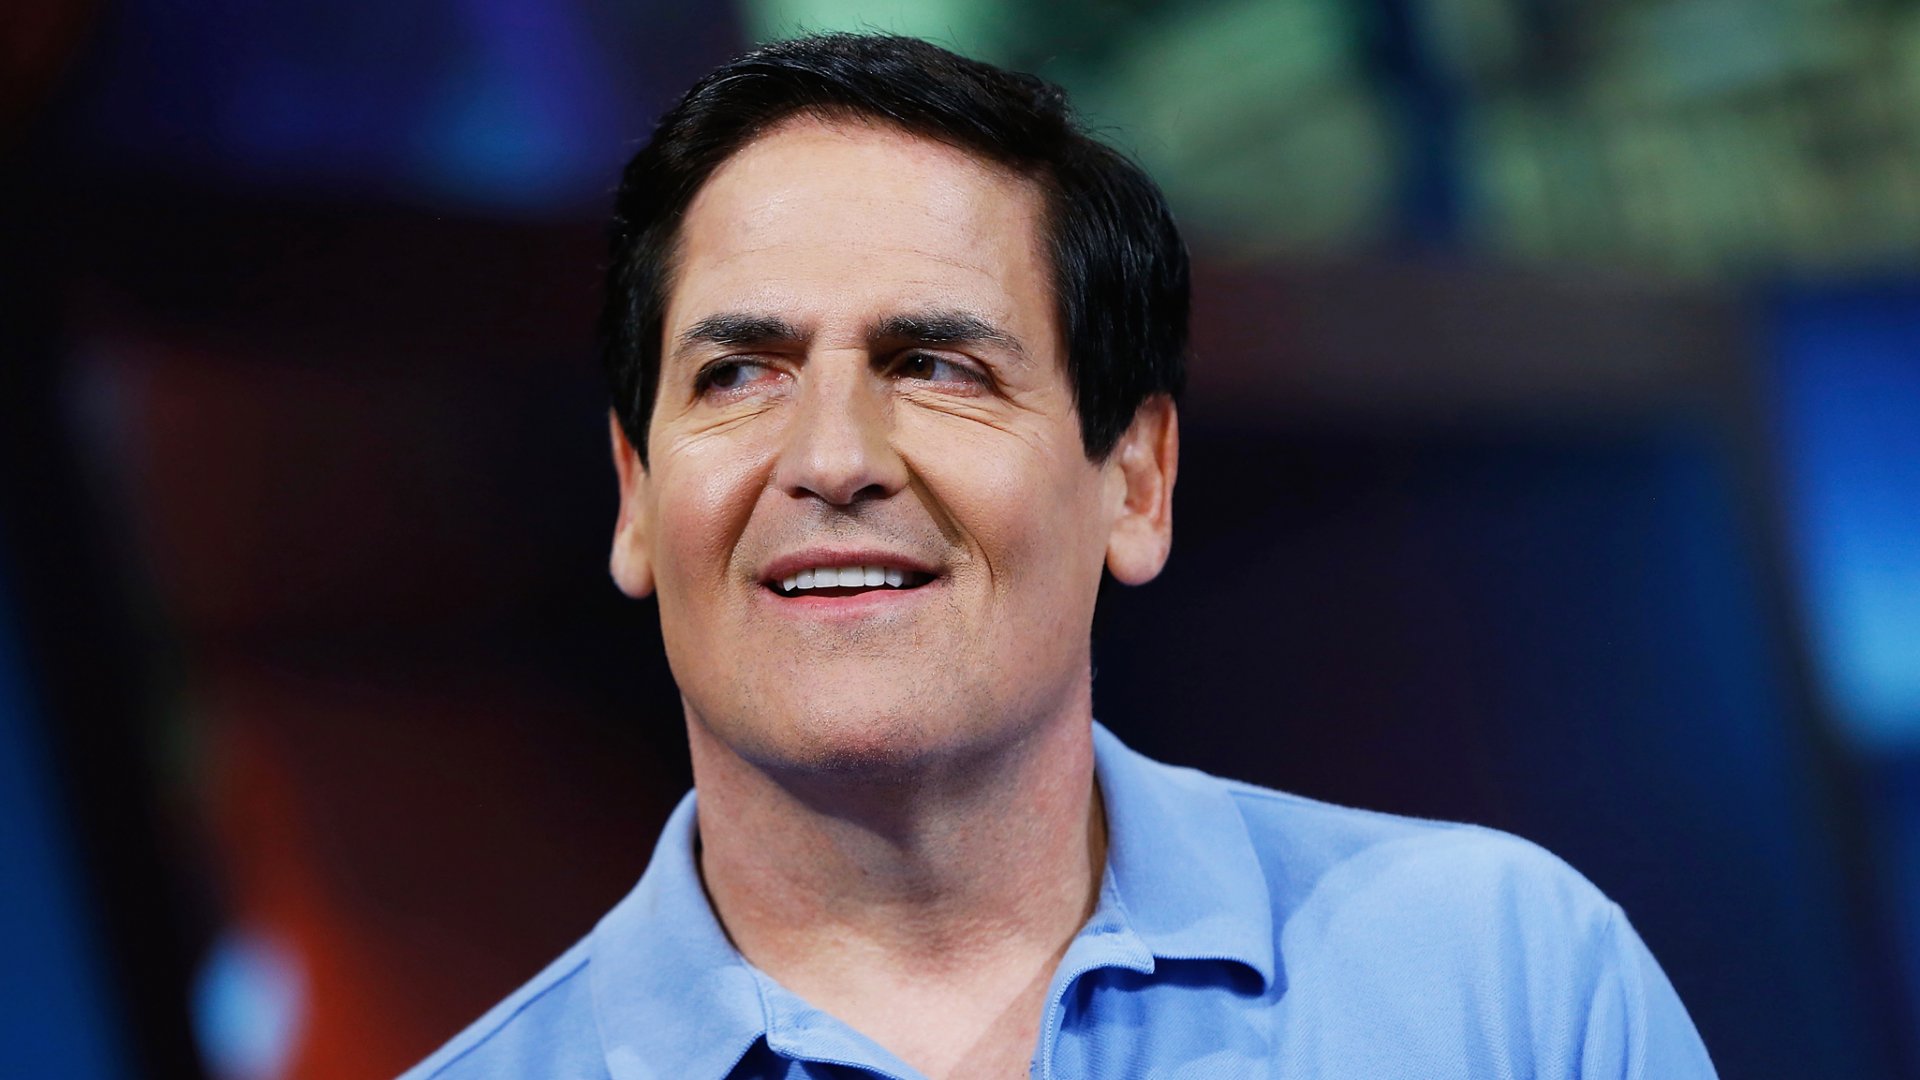 2 cryptocurrencies from billionaire Mark Cuban's portfolio that might surprise you